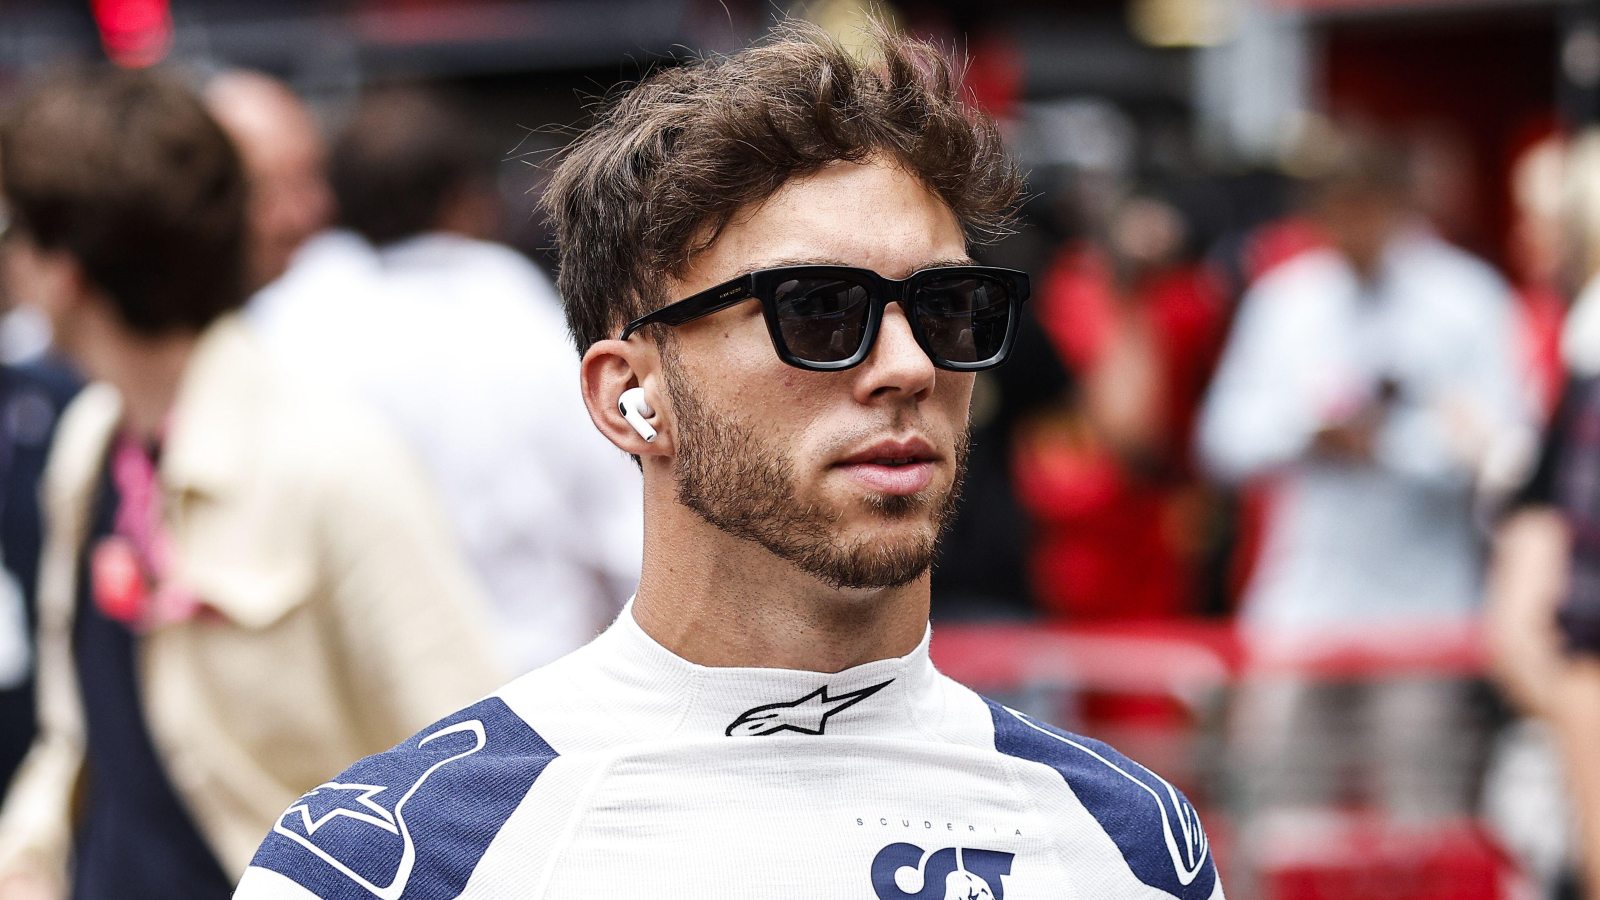 Pierre Gasly wearing sunglasses and headphones. Monaco, May 2022.